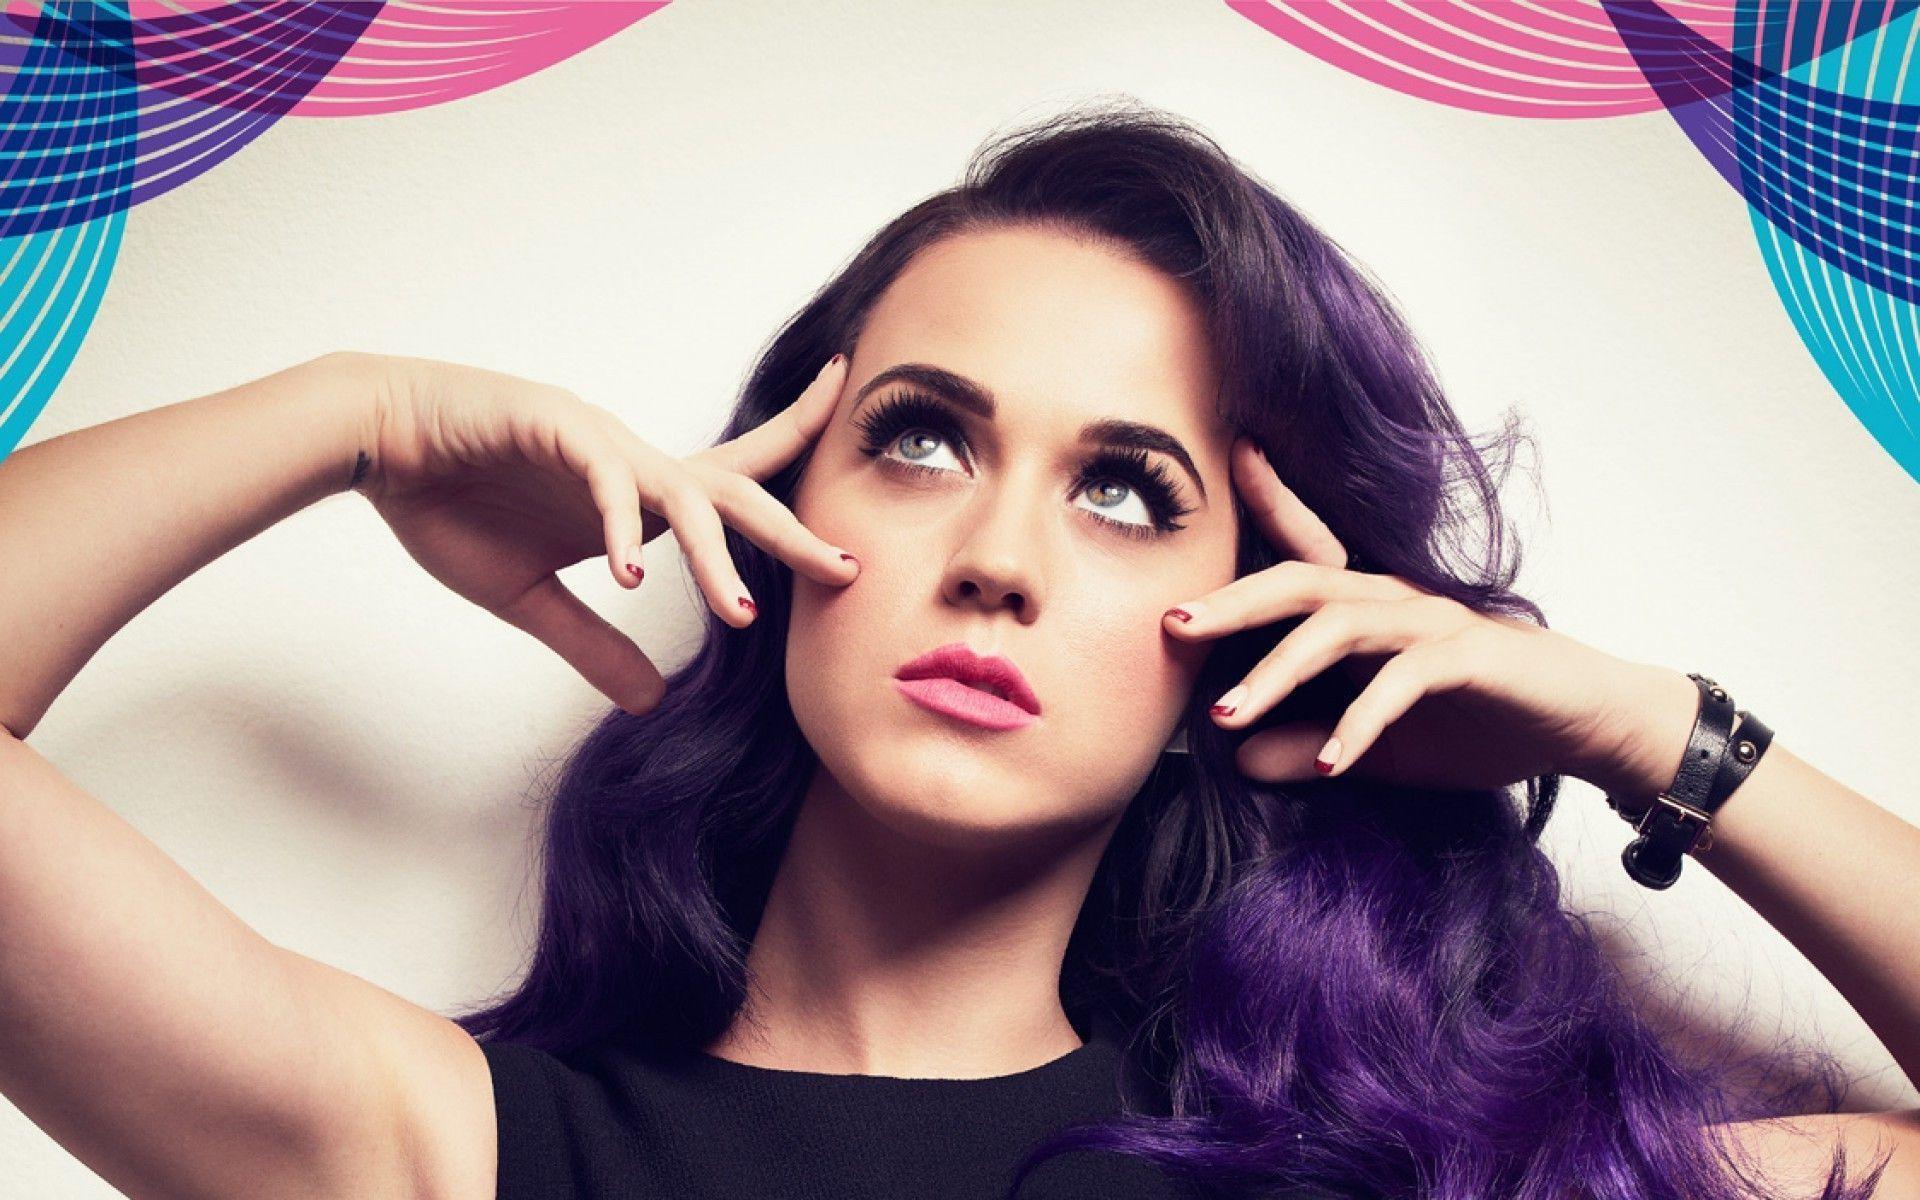 Wallpaper For > Katy Perry Wallpaper 2014